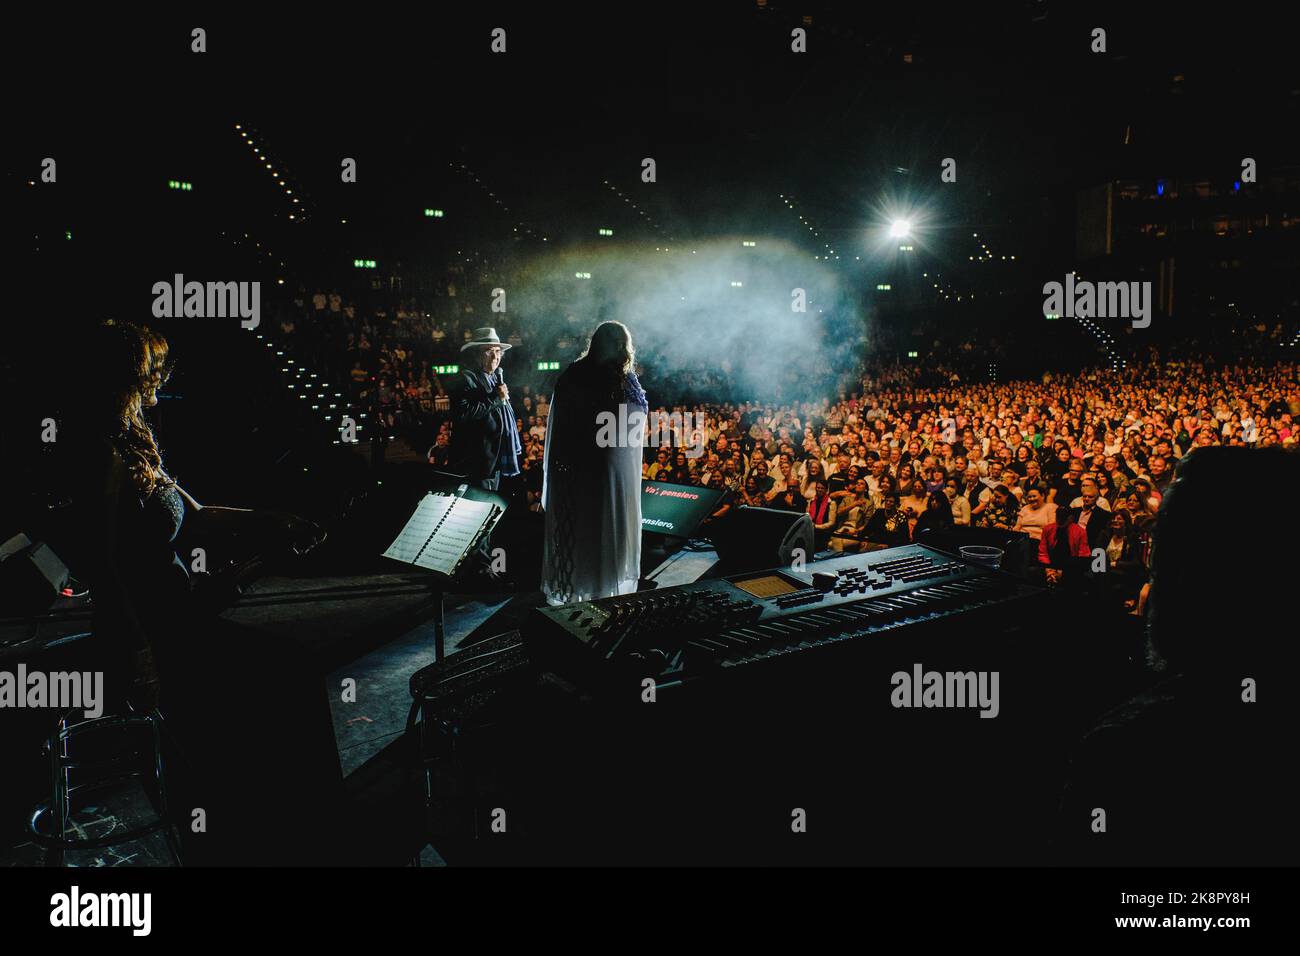 Zurich, Switzerland. 22nd, October 2022. The Italian-American pop duo Al Bano and Romina Power performs a live concert at La Notte Italiana show at the Hallenstadion in Zürich. Here singer Romina Power (R) is seen live on stage with singer Al Bano (L). (Photo credit: Gonzales Photo - Tilman Jentzsch). Stock Photo